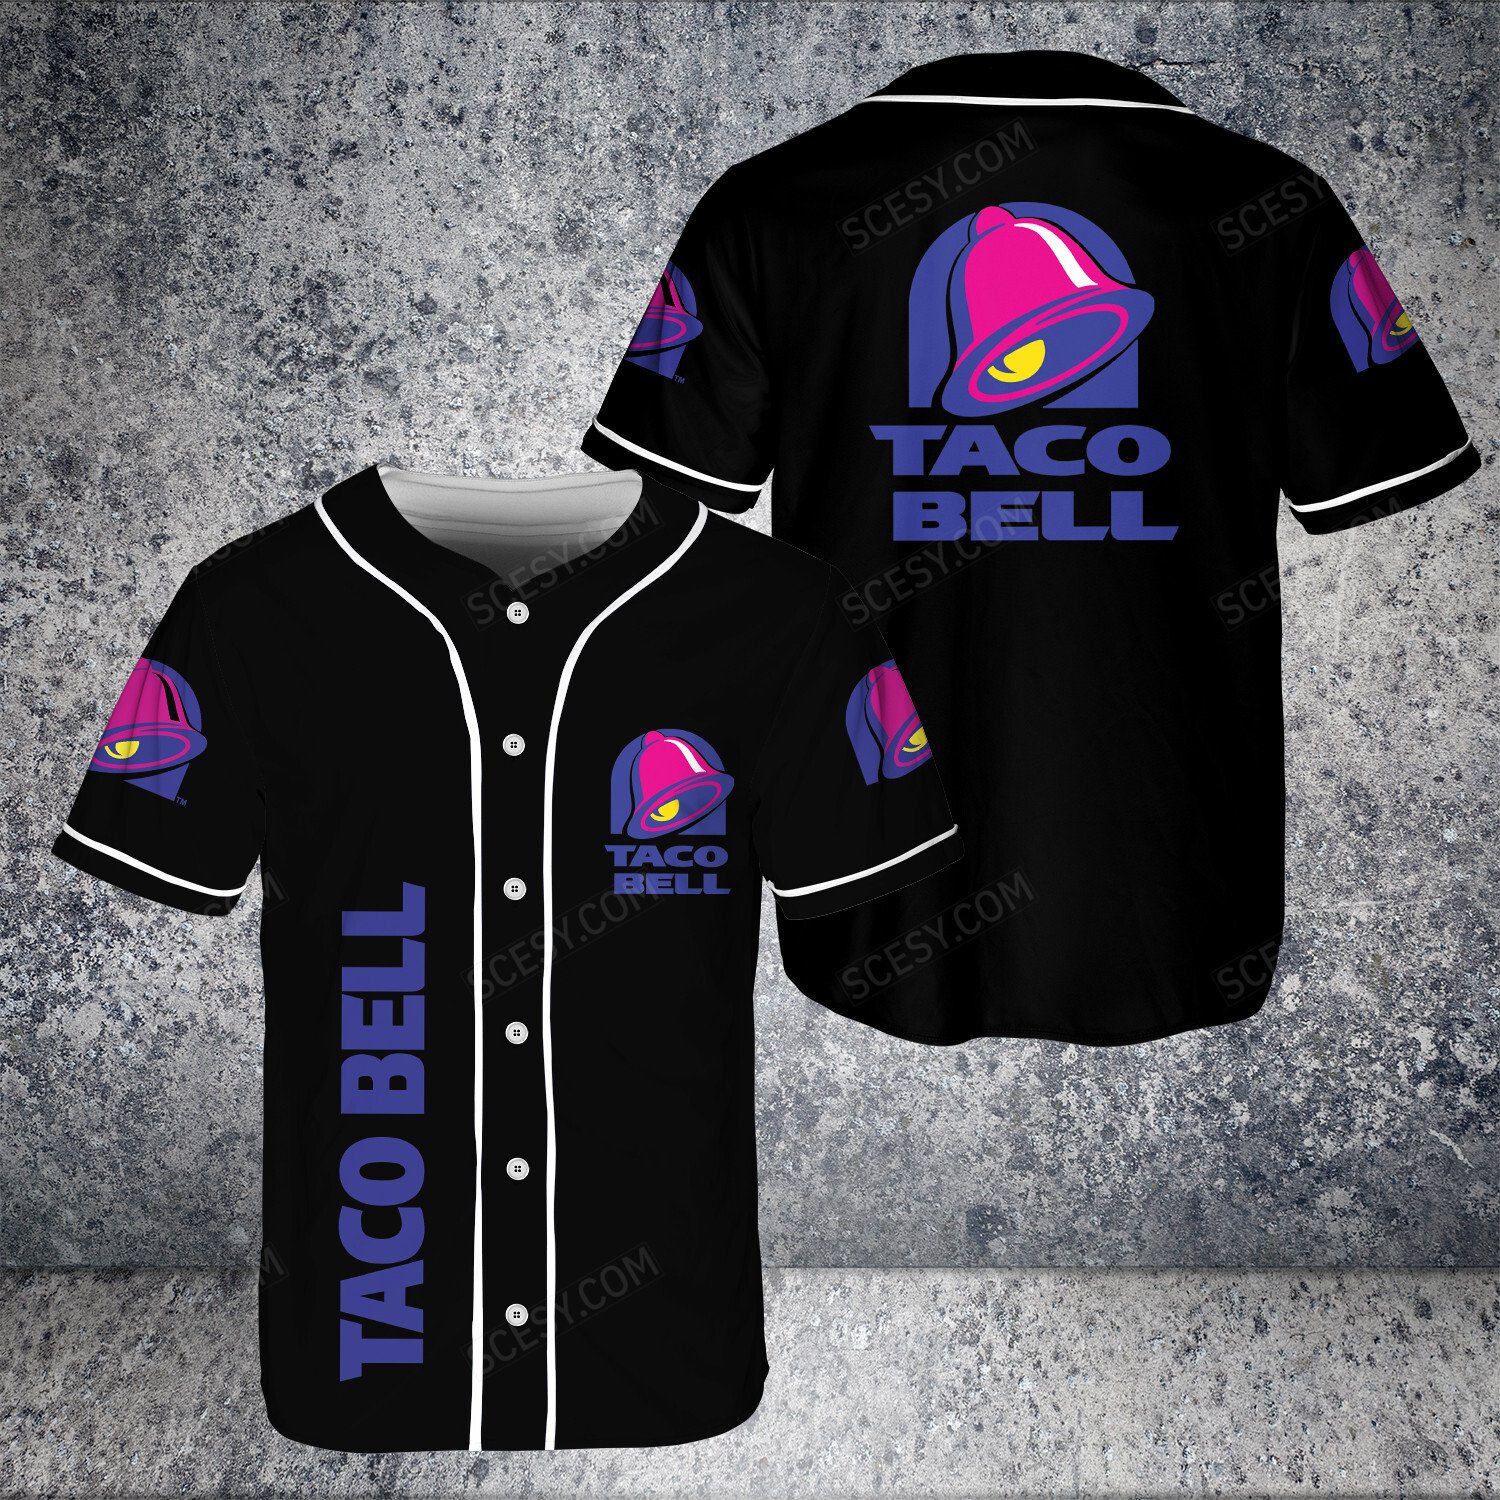 Taco Bell Baseball Jersey for Fast Food Fans - Scesy